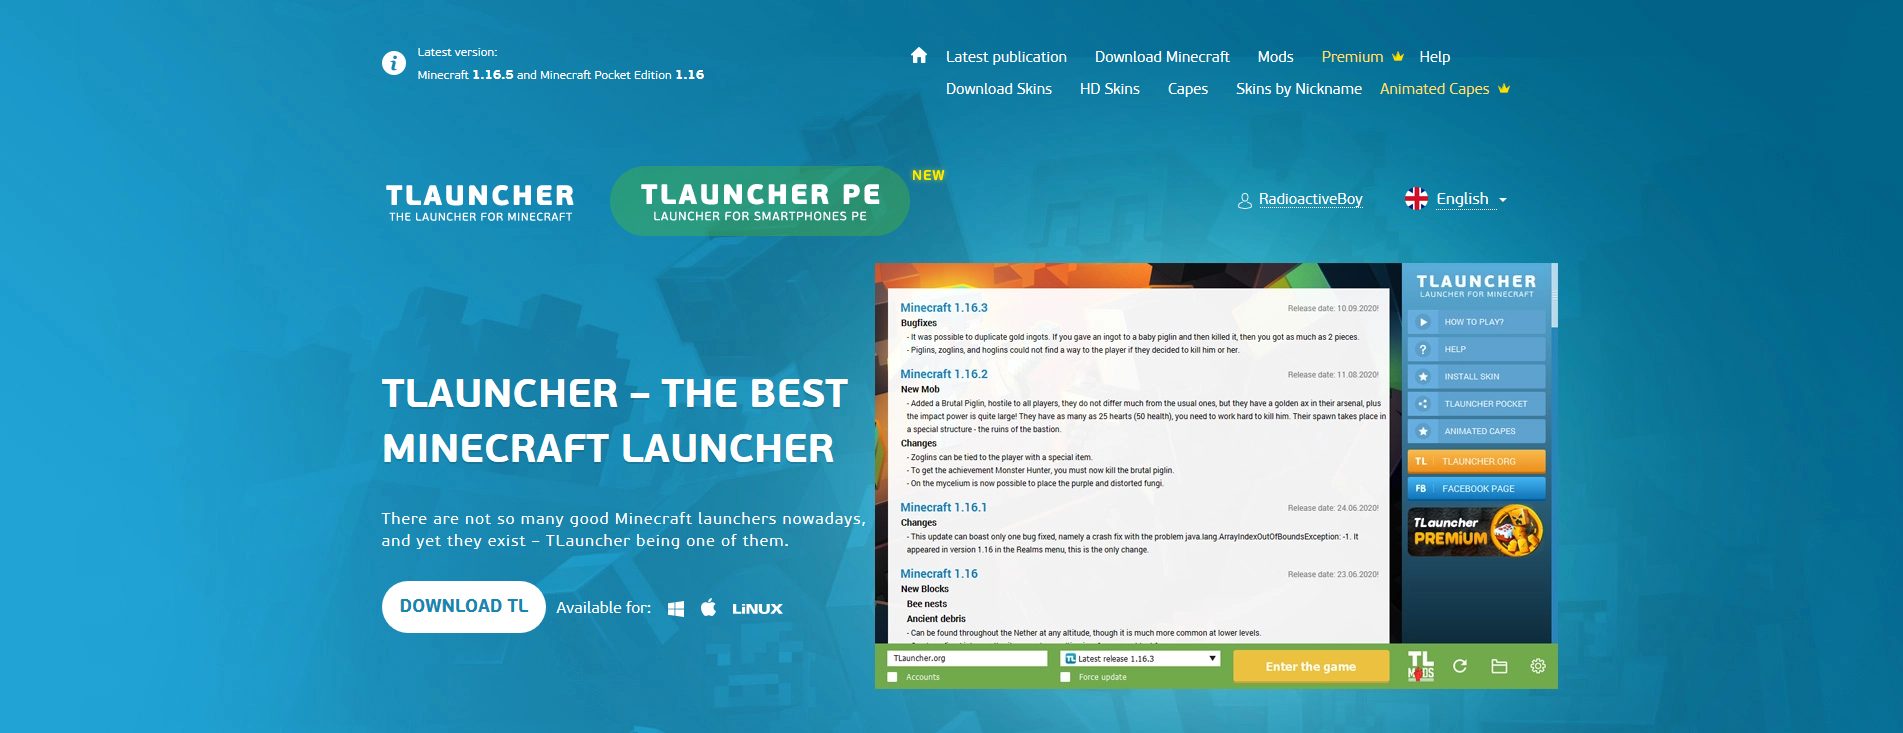 minecraft, free, t launcher, tlauncher,